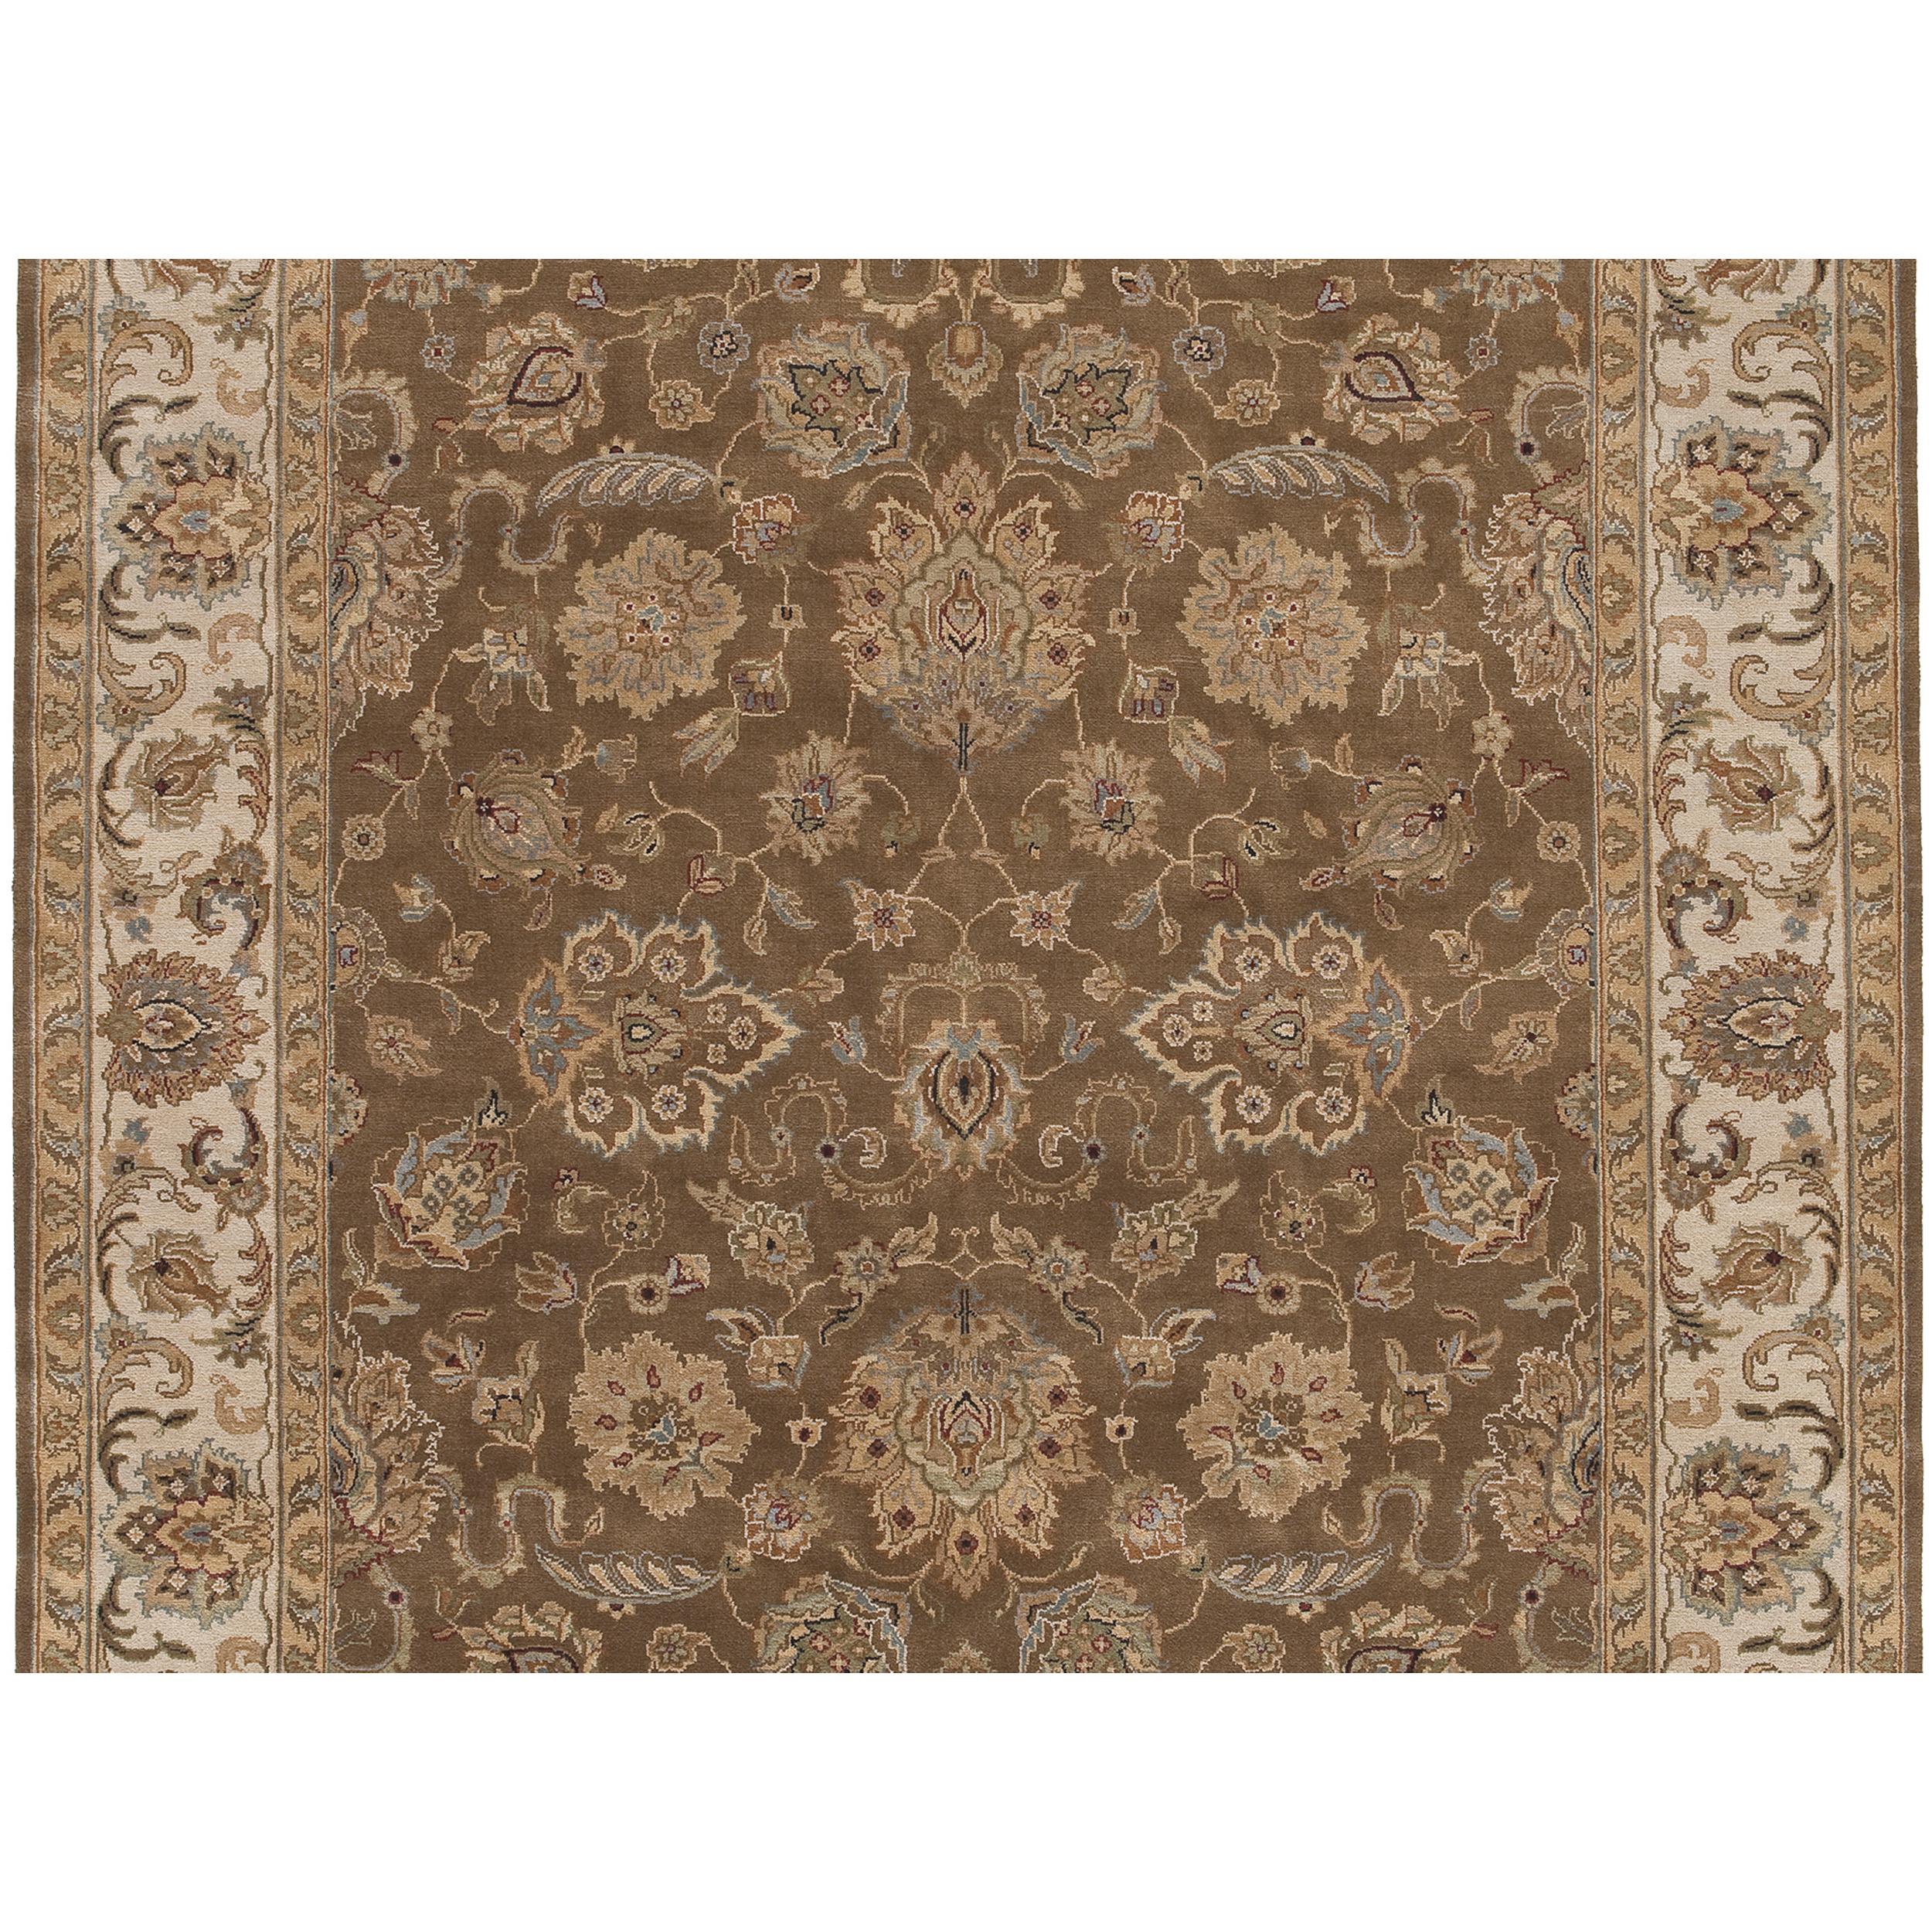 Luxury Traditional Hand-Knotted Agra Fennel and Cream 12X15 Rug In New Condition For Sale In Secaucus, NJ